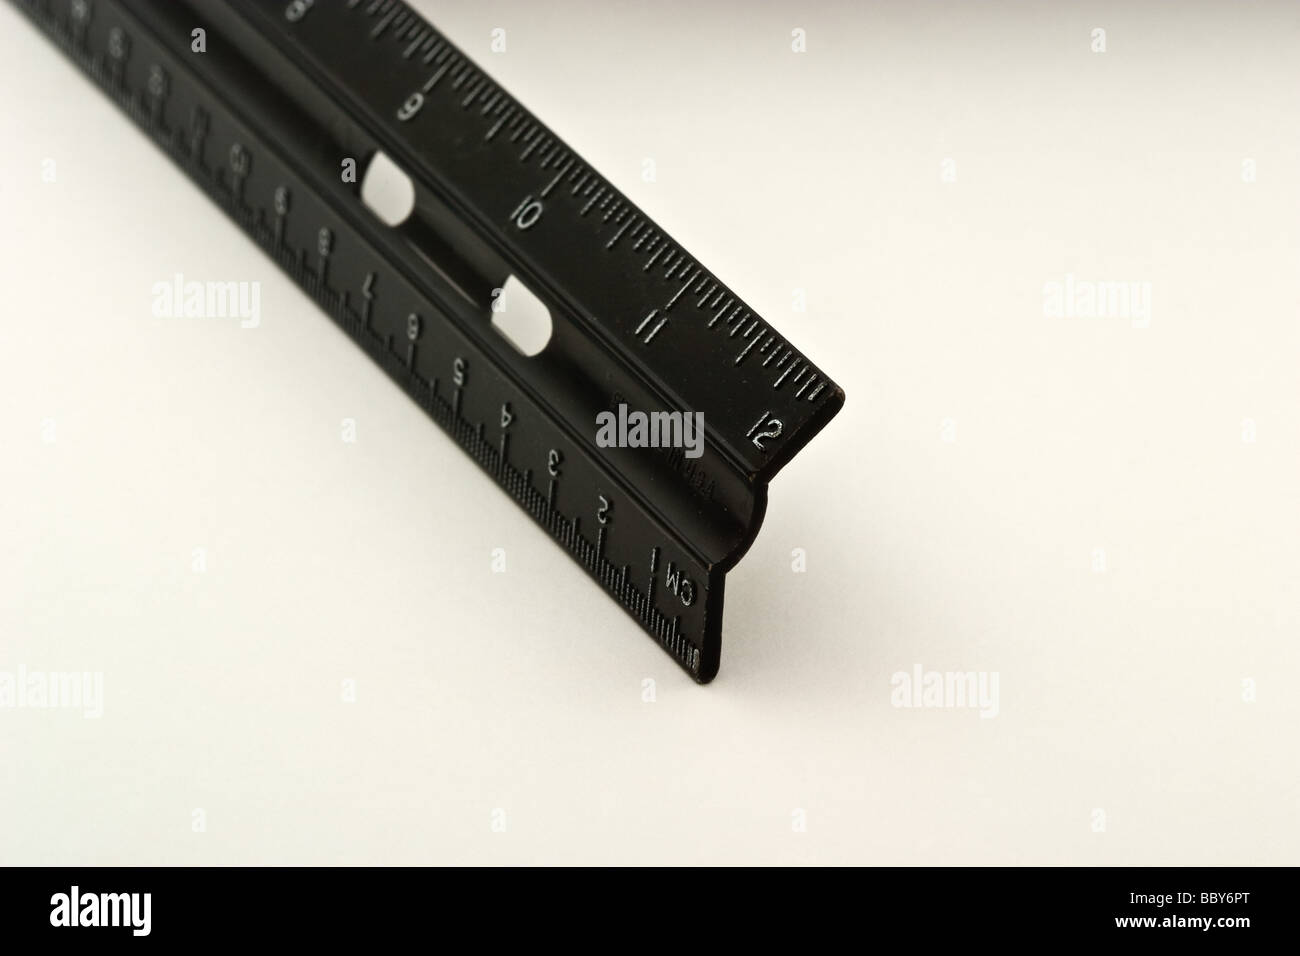 End of a black plastic ruler showing inches and centimeters Stock Photo